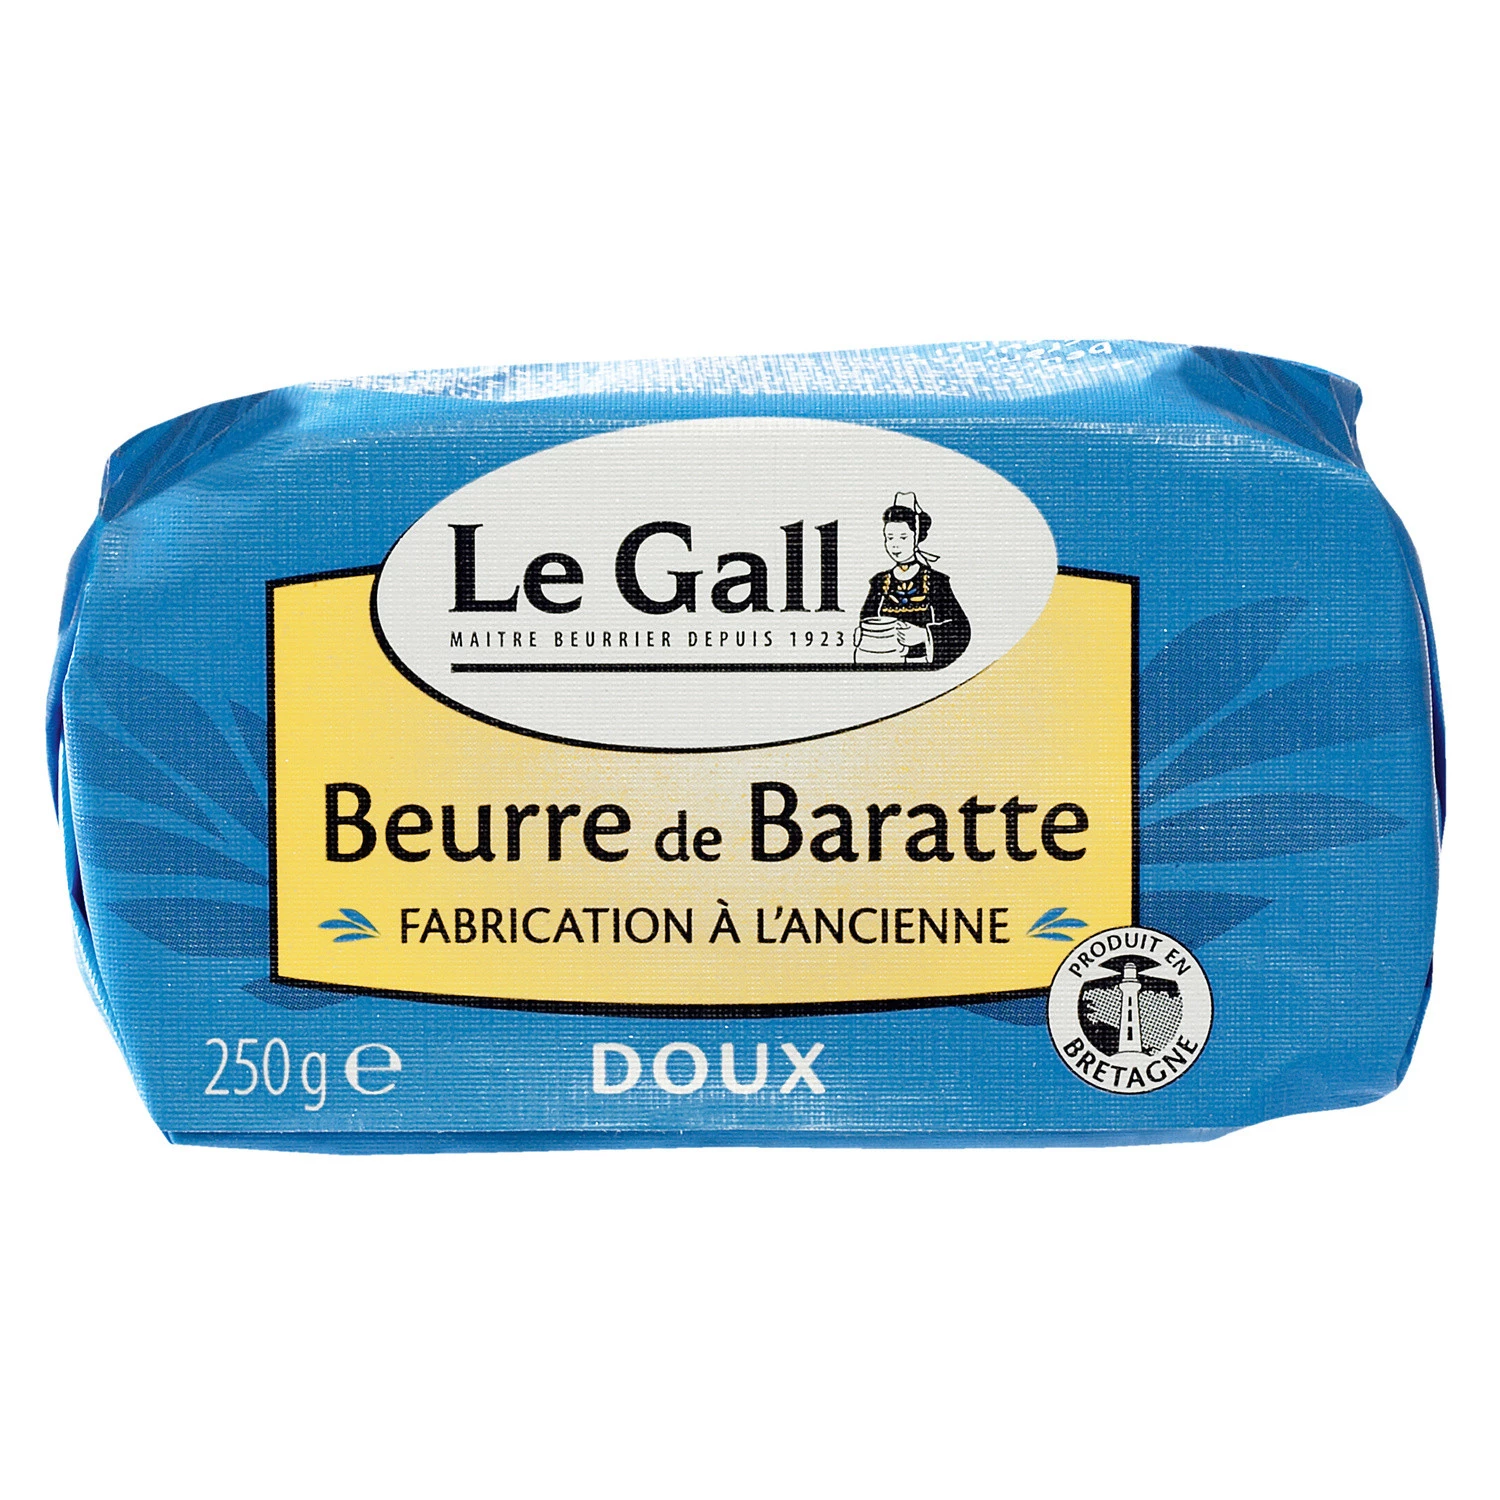 Baratte's butter unsalted Le Gall 250g